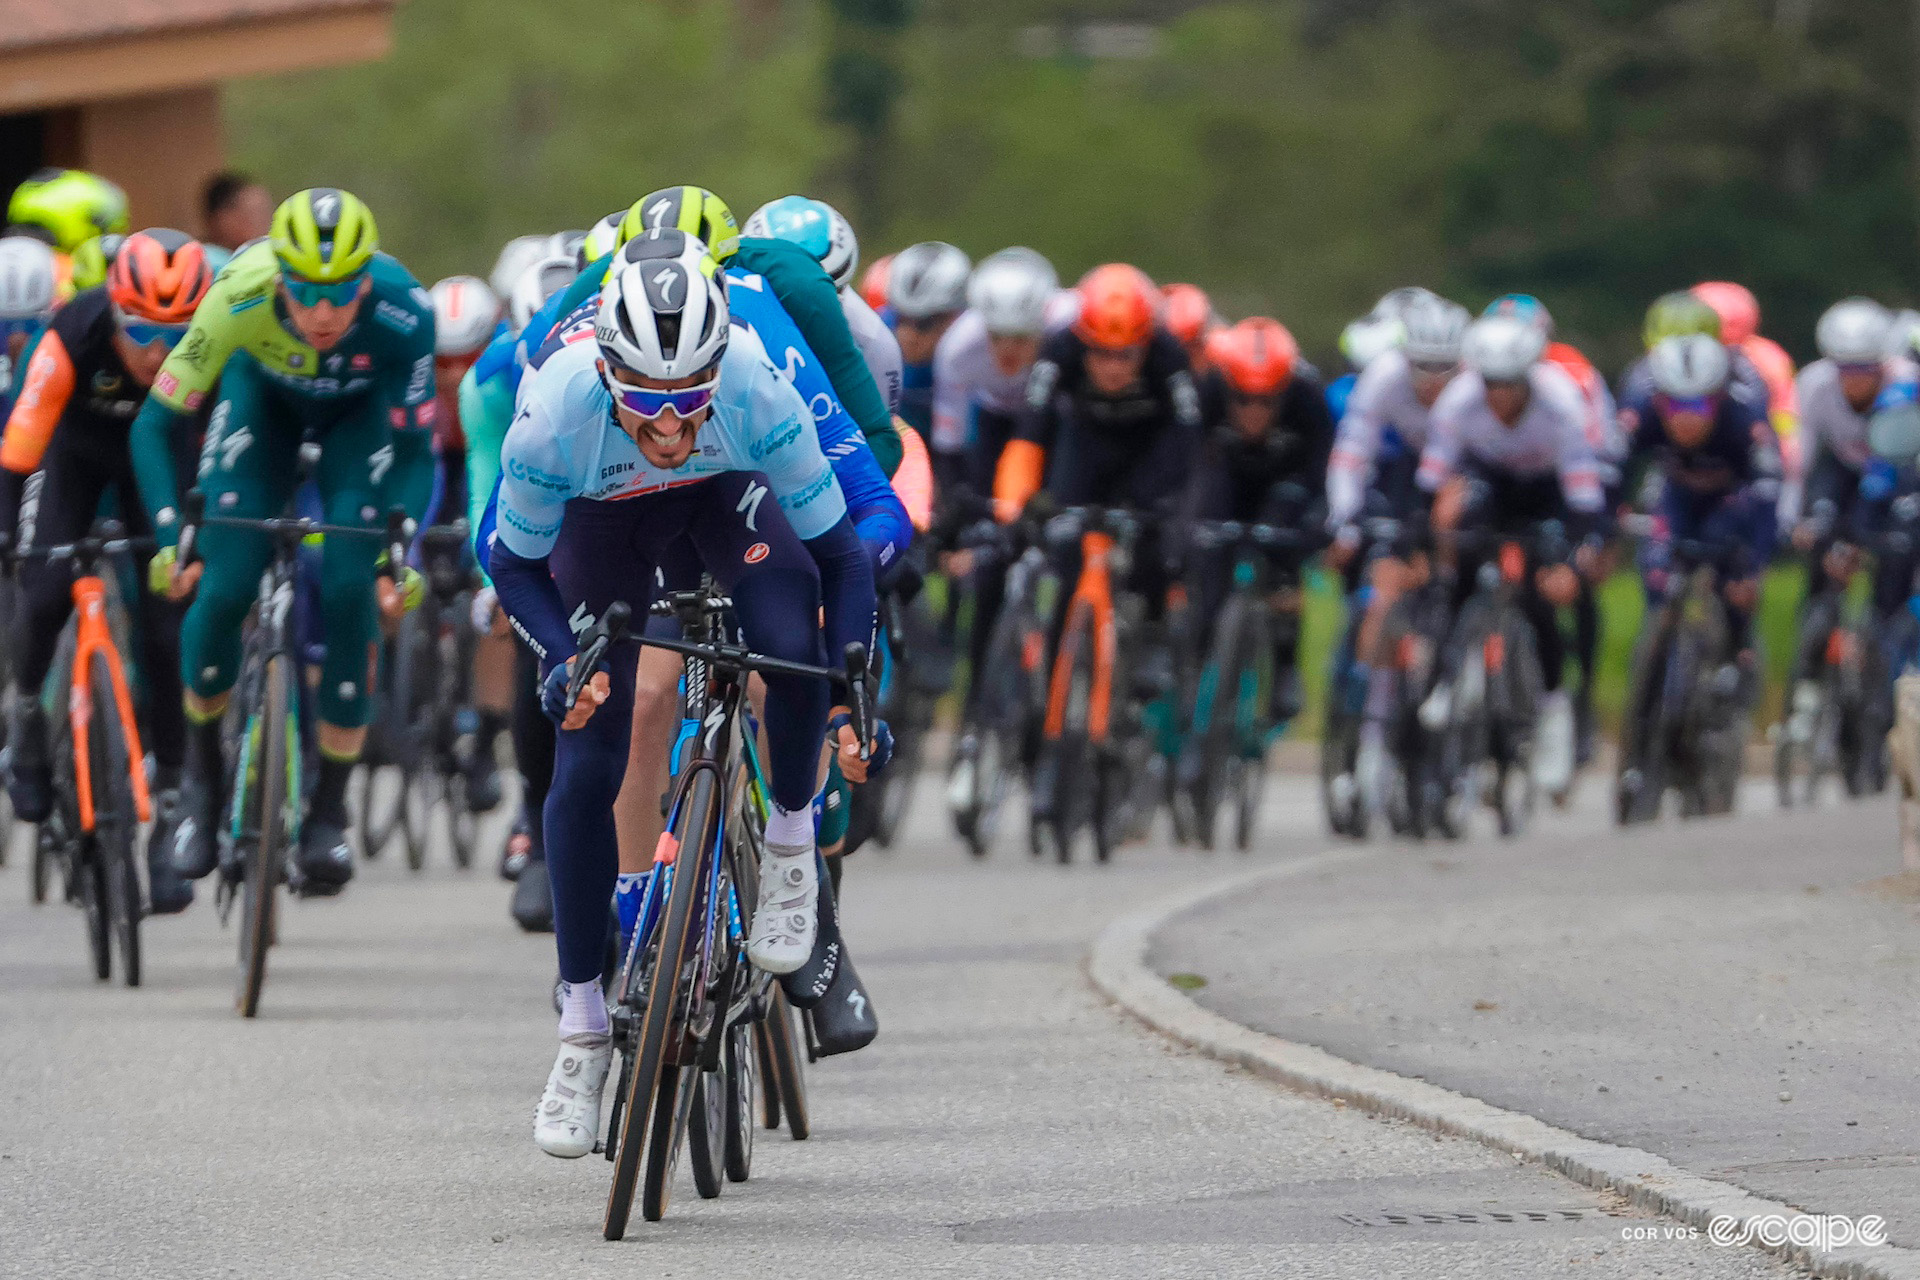 Julian Alaphilippe on the attack during the first road stage of the Tour de Romandie.